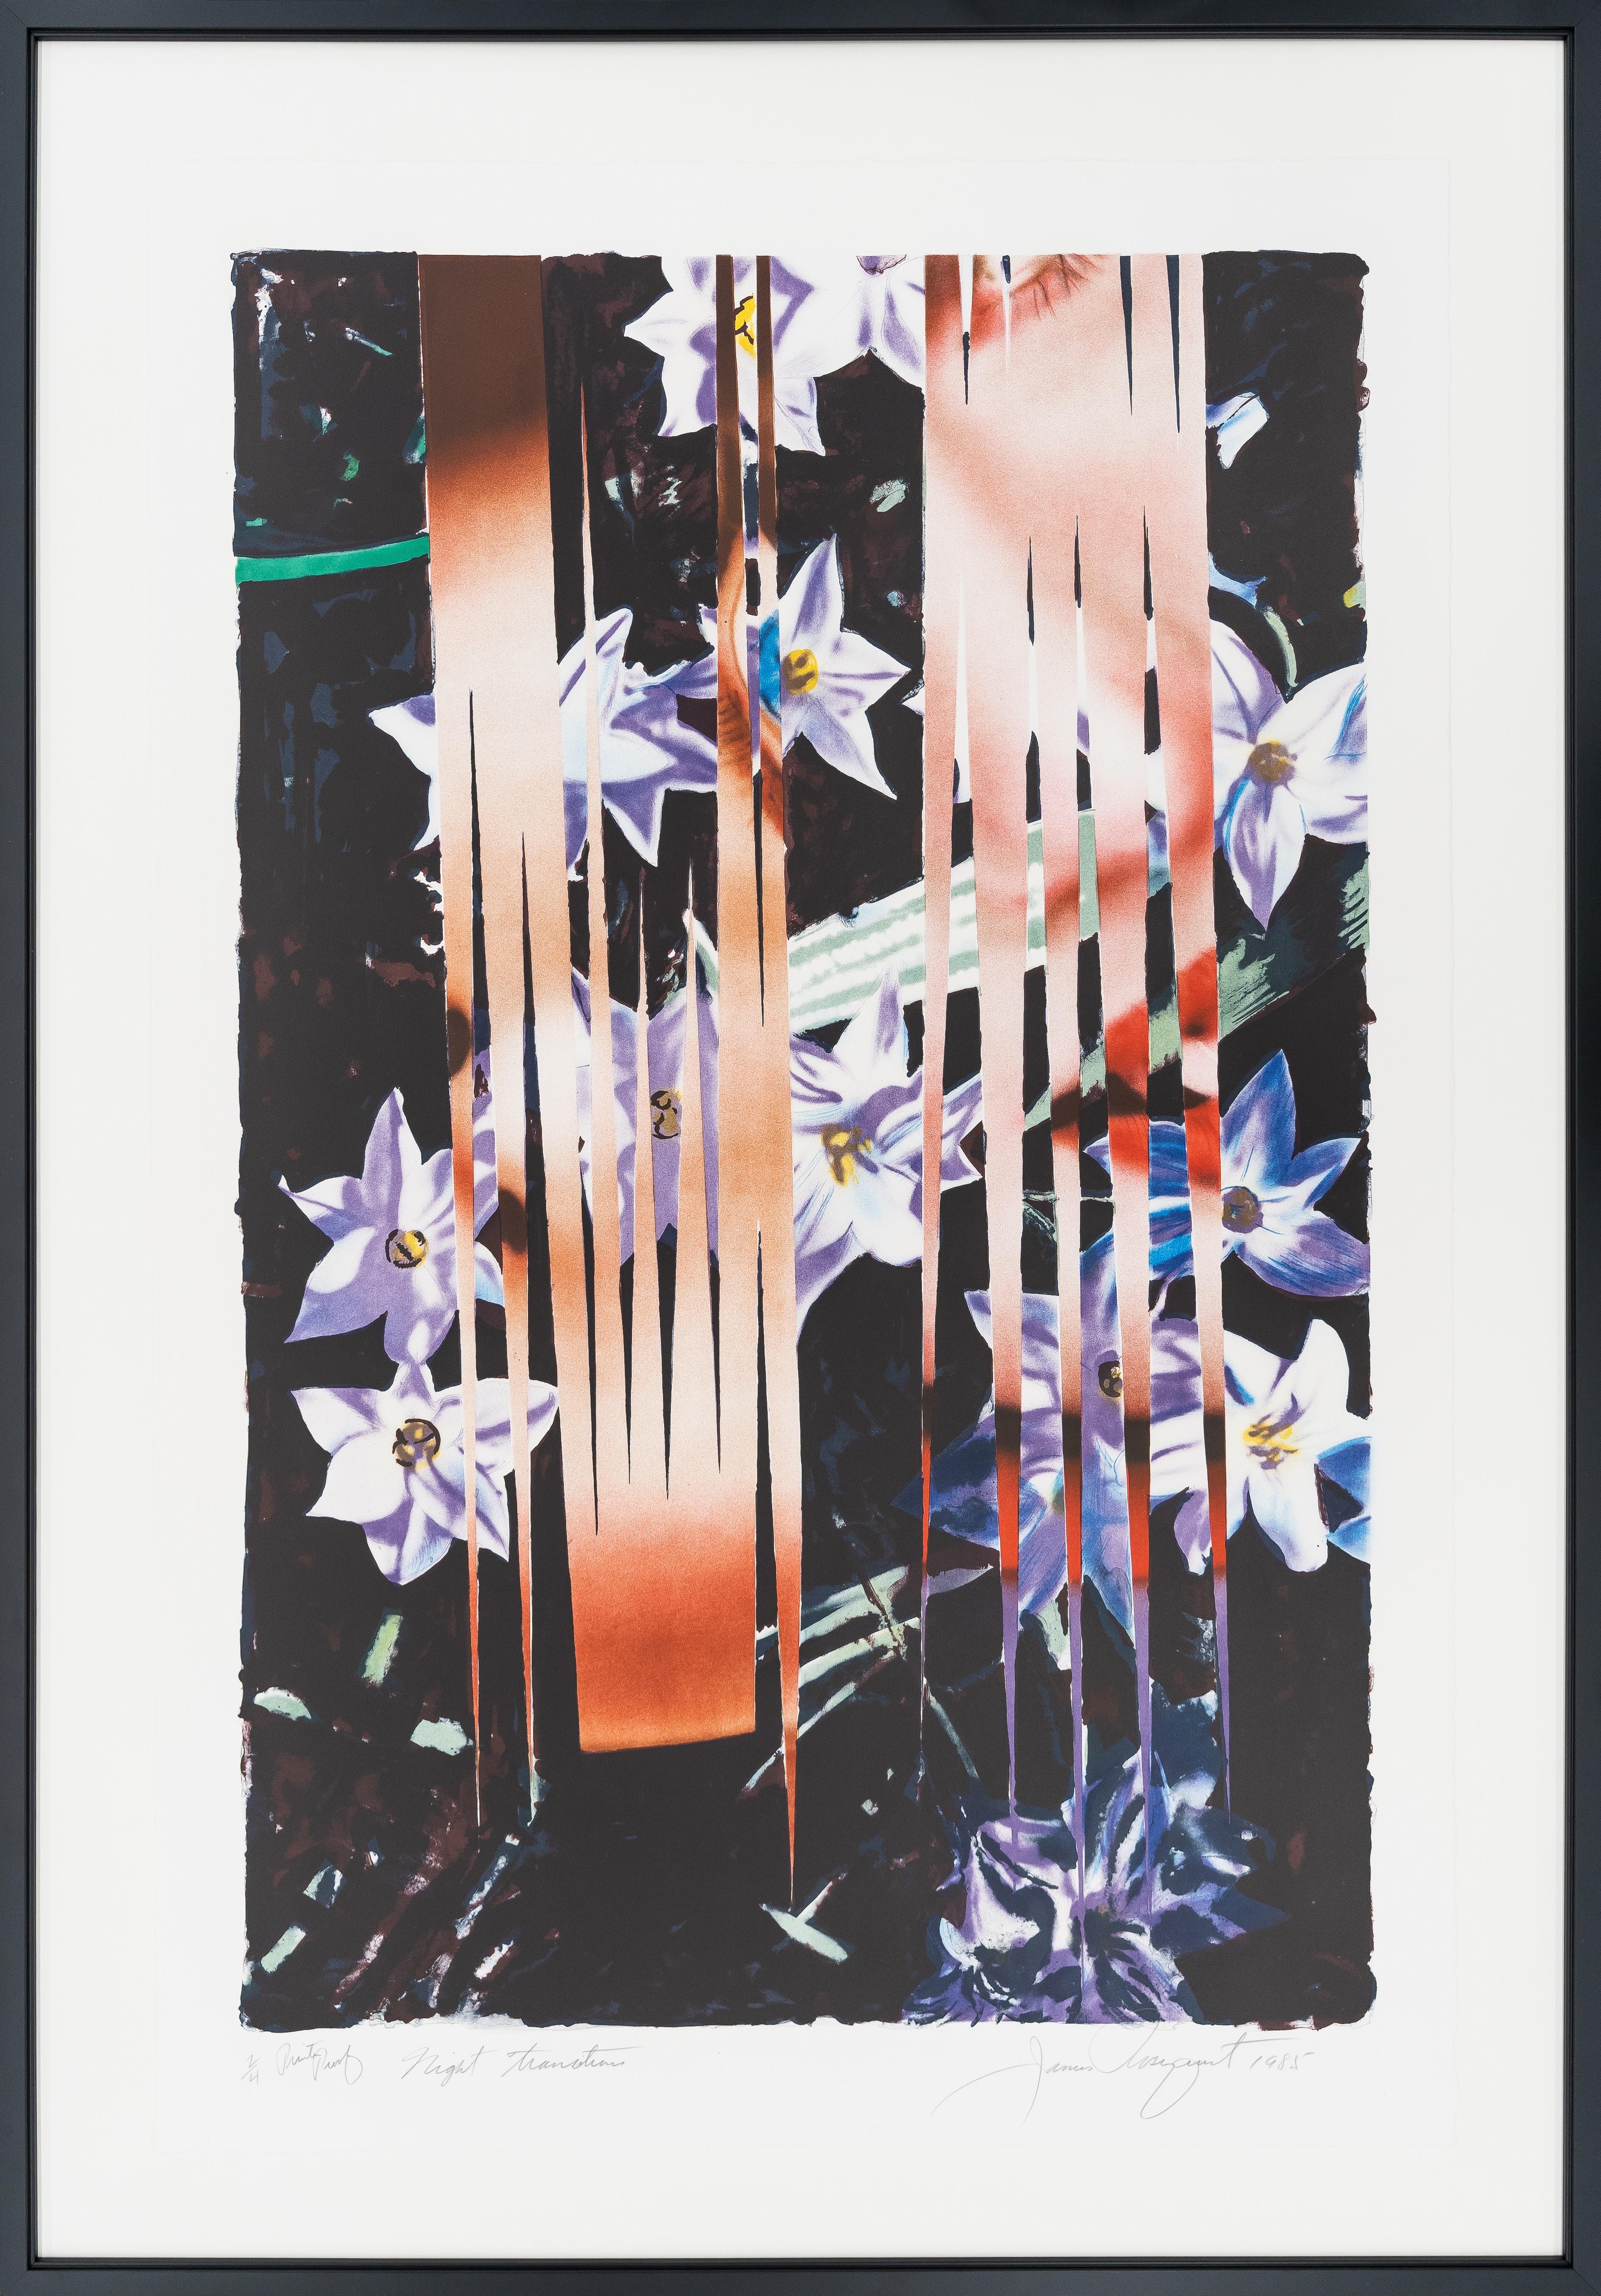 JAMES ROSENQUIST
   (B. 1933)

"Night Transitions"

12 color lithograph on Arches, 1985
Catalog #204
Sheet size: 47” x 30” 
Printers Proof 2/4 – full edition of 35, and 7 AP
Signed, numbered, dated, and titled in lower margin

James Rosenquist, born